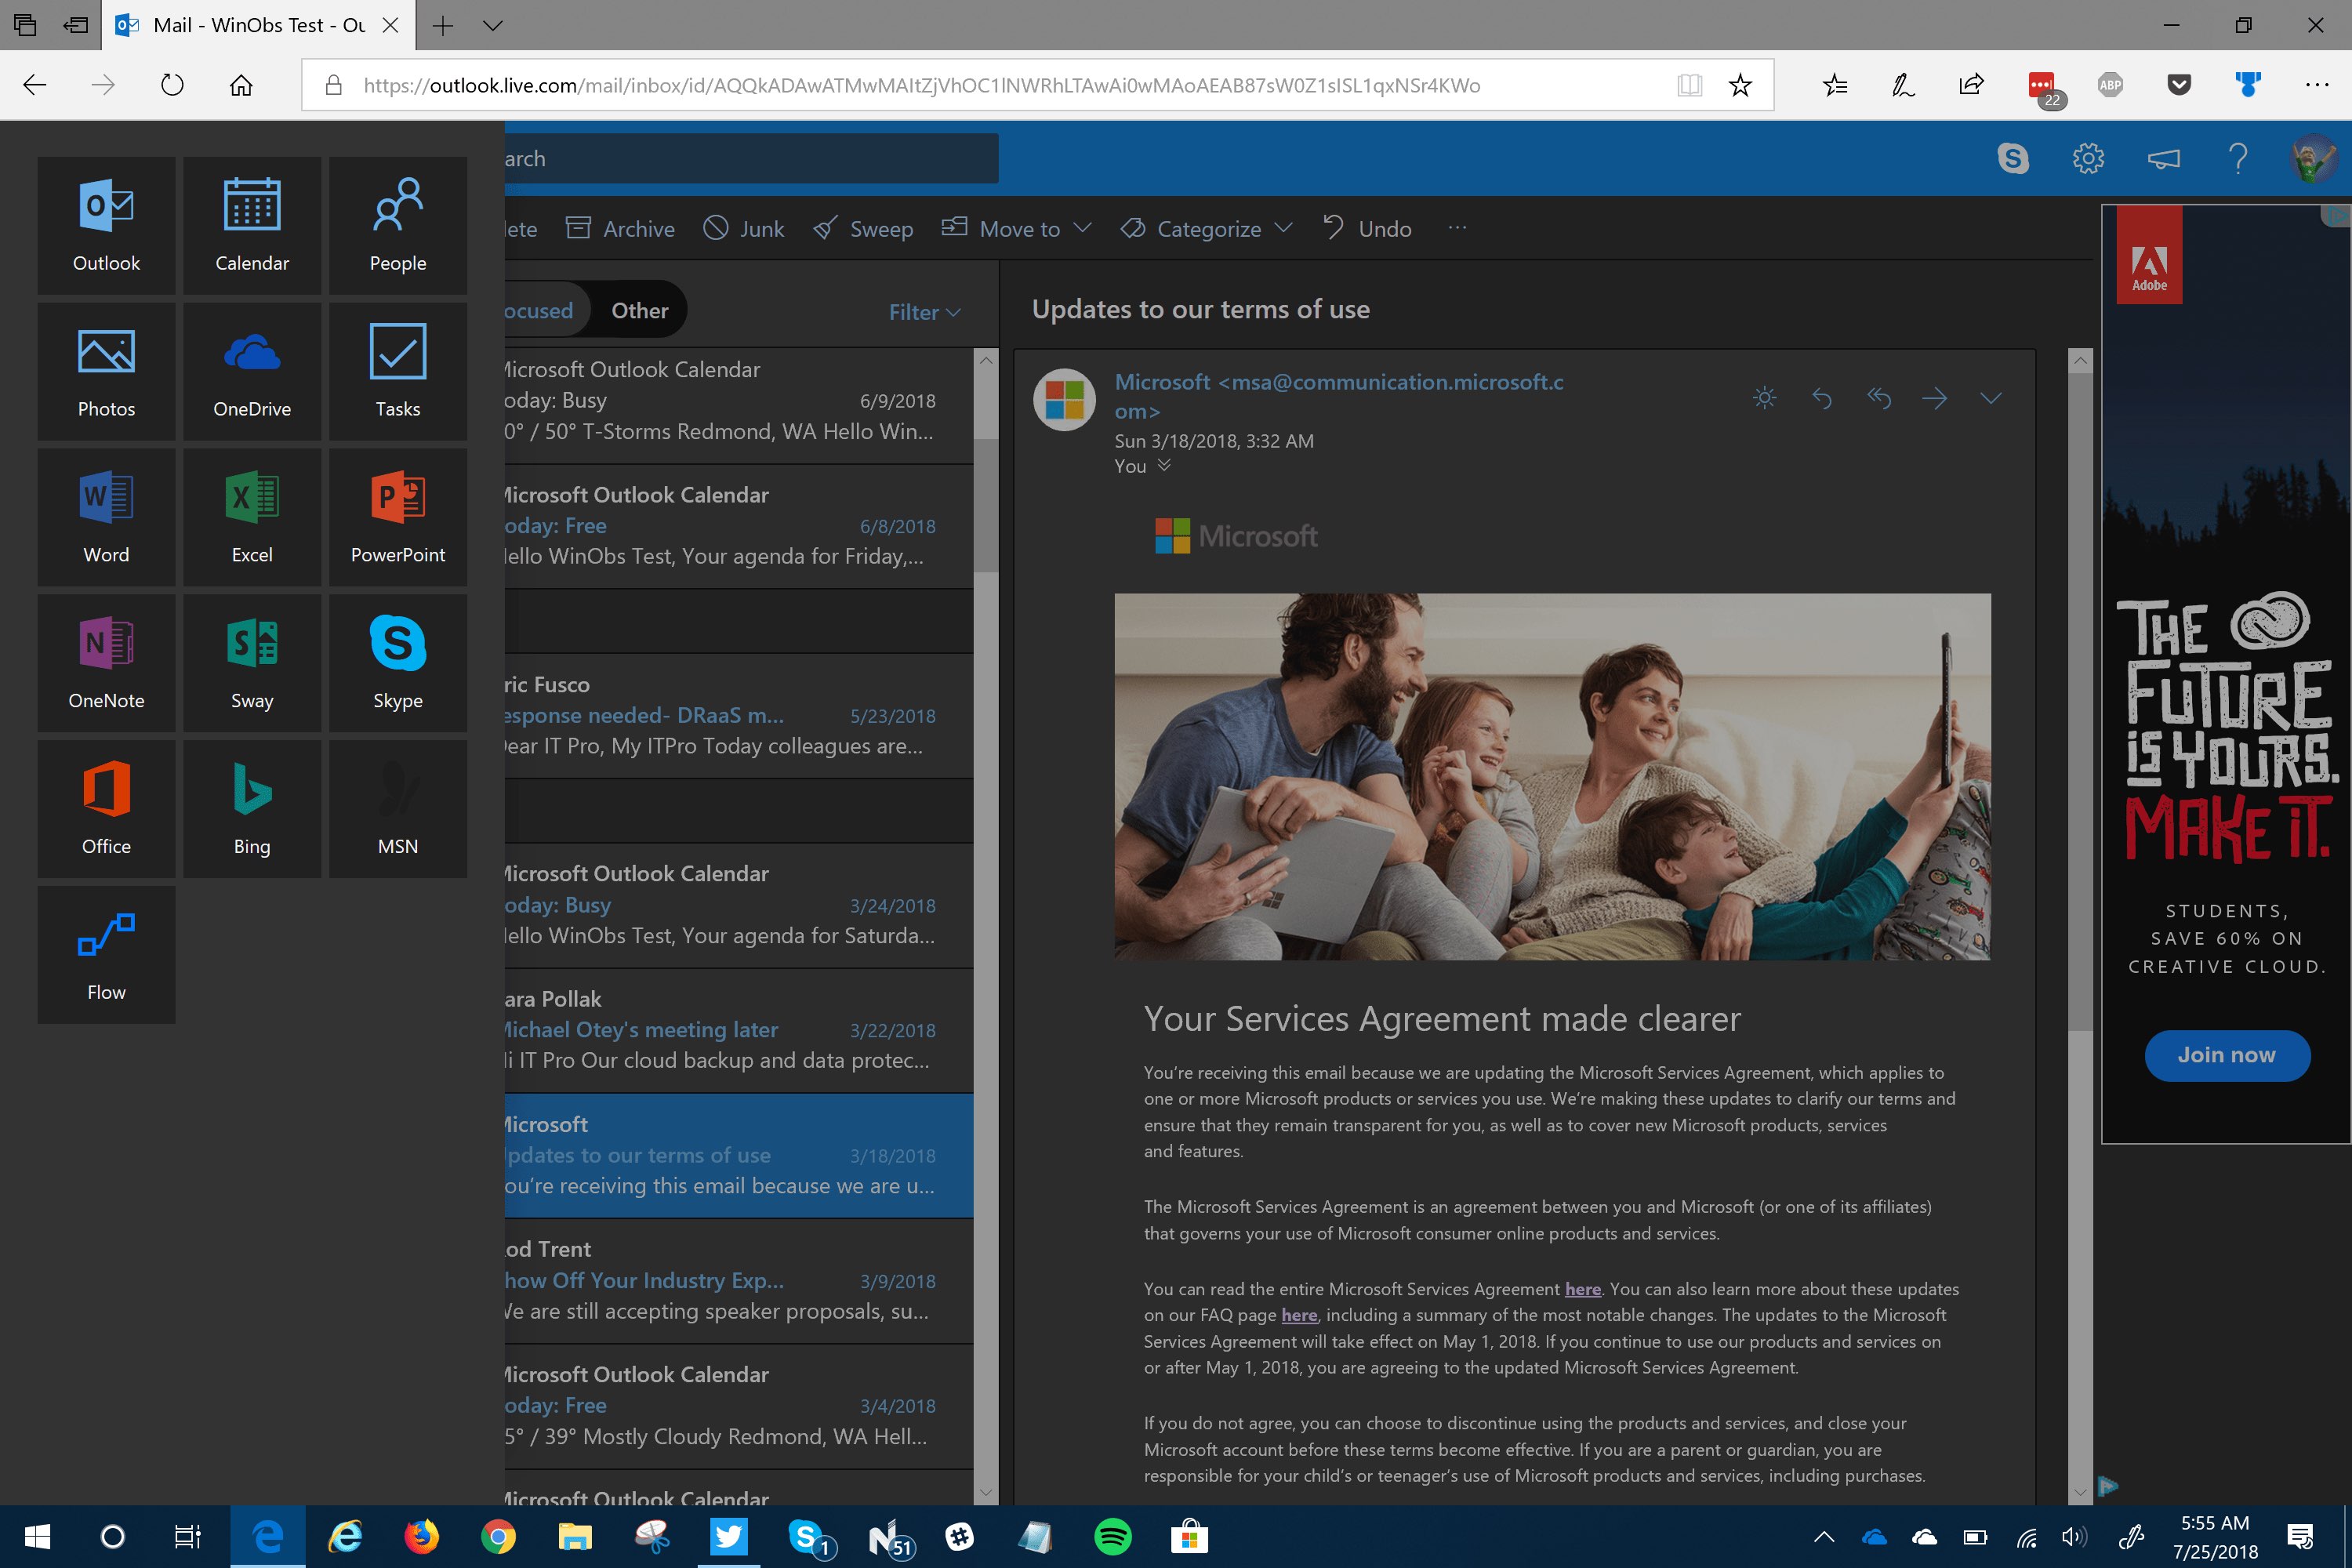 Example screenshots showcasing the various aspects of Dark Mode on Outlook.com